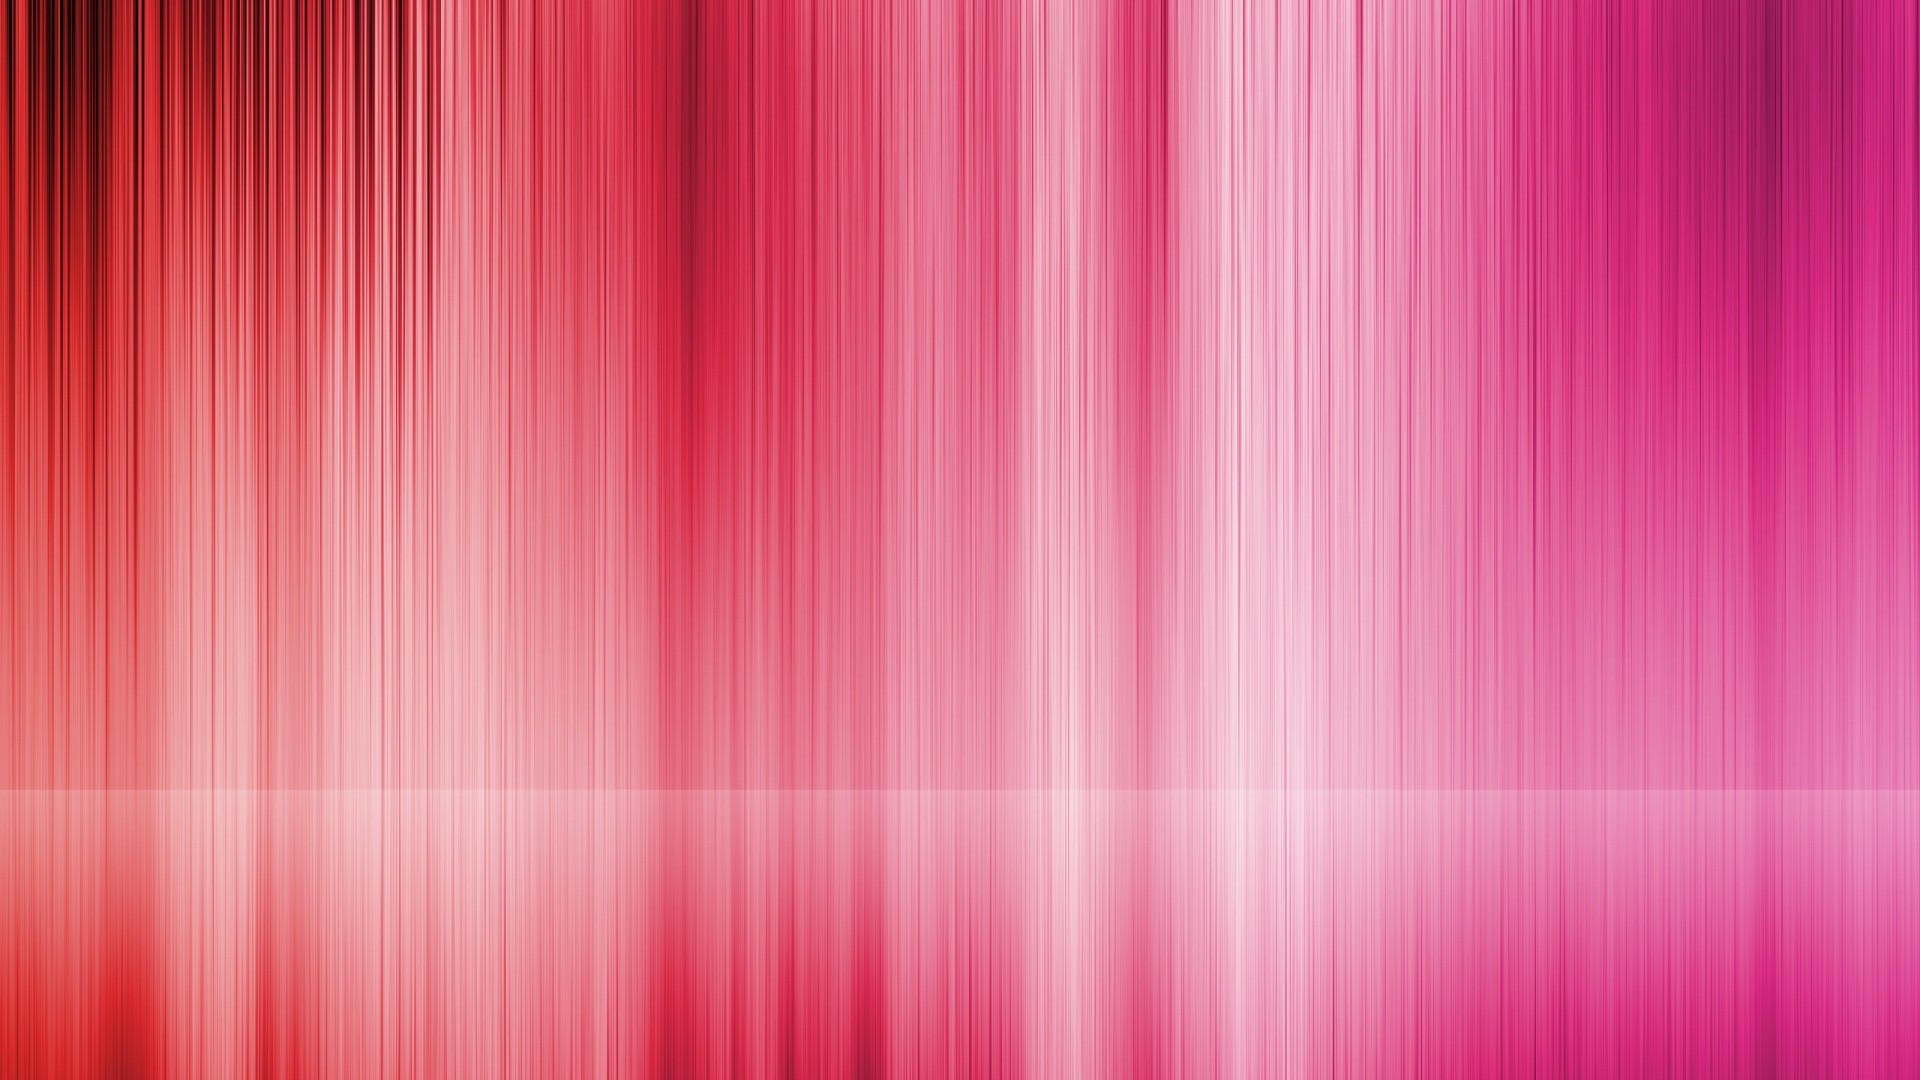 1920x1080 ... Background Full HD 1080p.  Wallpaper abstraction, pink, red,  stripes, white